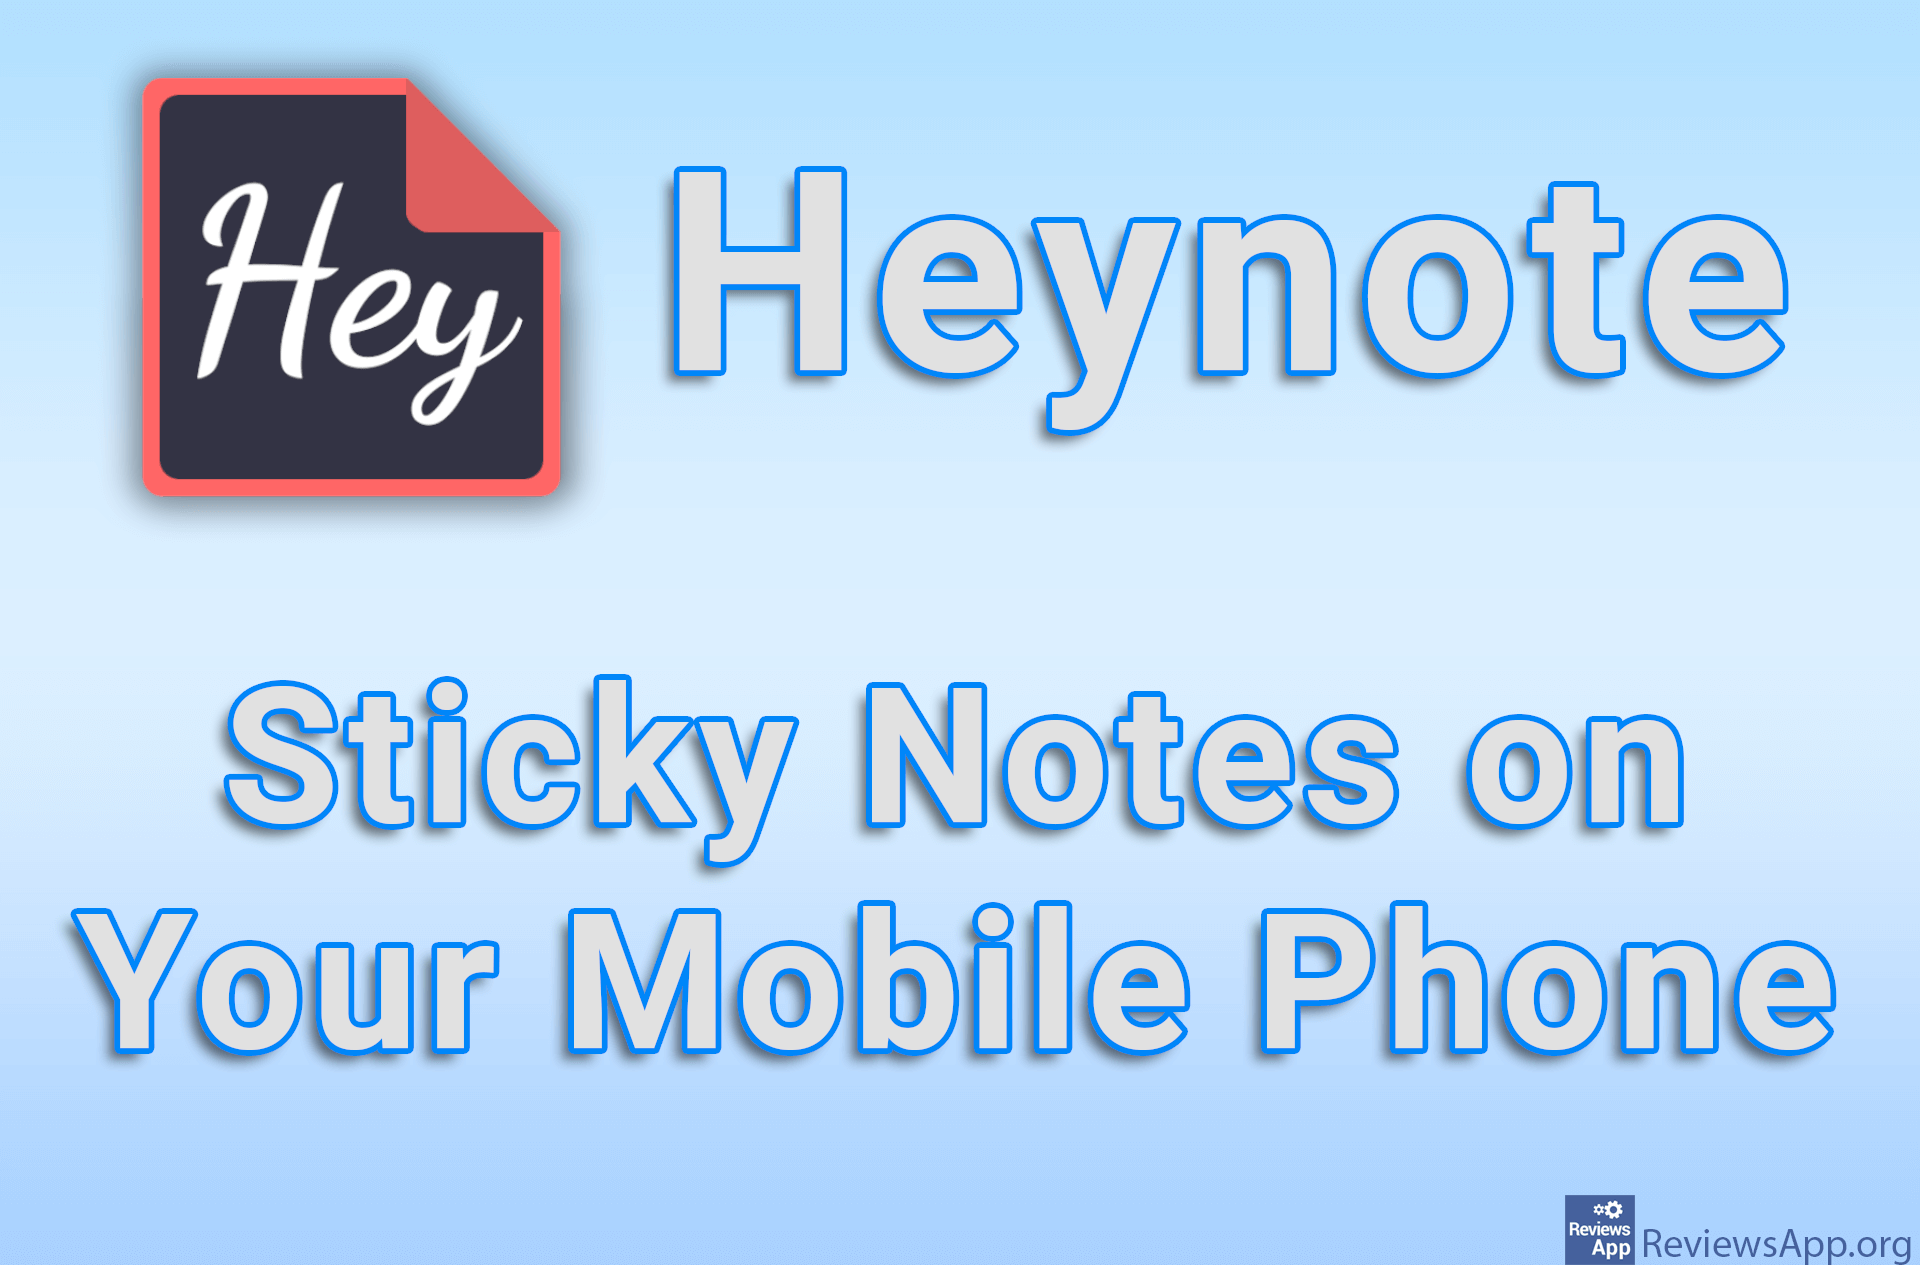 Heynote – Sticky Notes on Your Mobile Phone